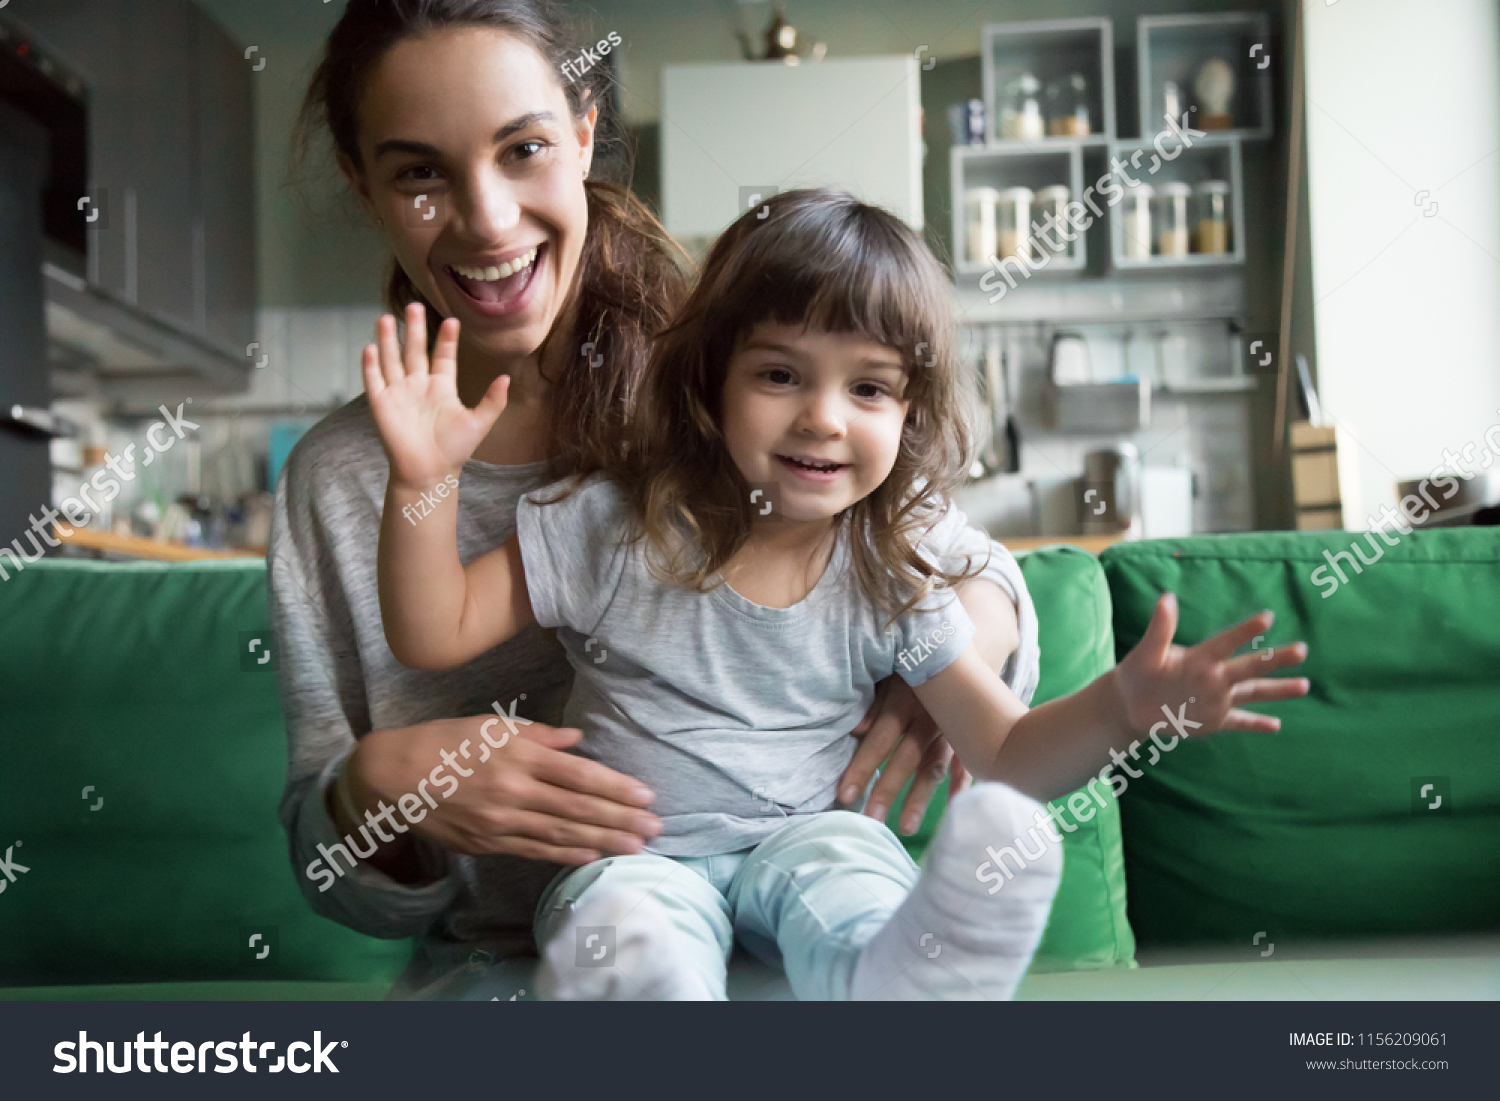 Portrait of happy excited young mother and kid girl waving hands looking at camera, smiling mom with child daughter making video call, family vloggers recording video blog or vlog together concept #1156209061